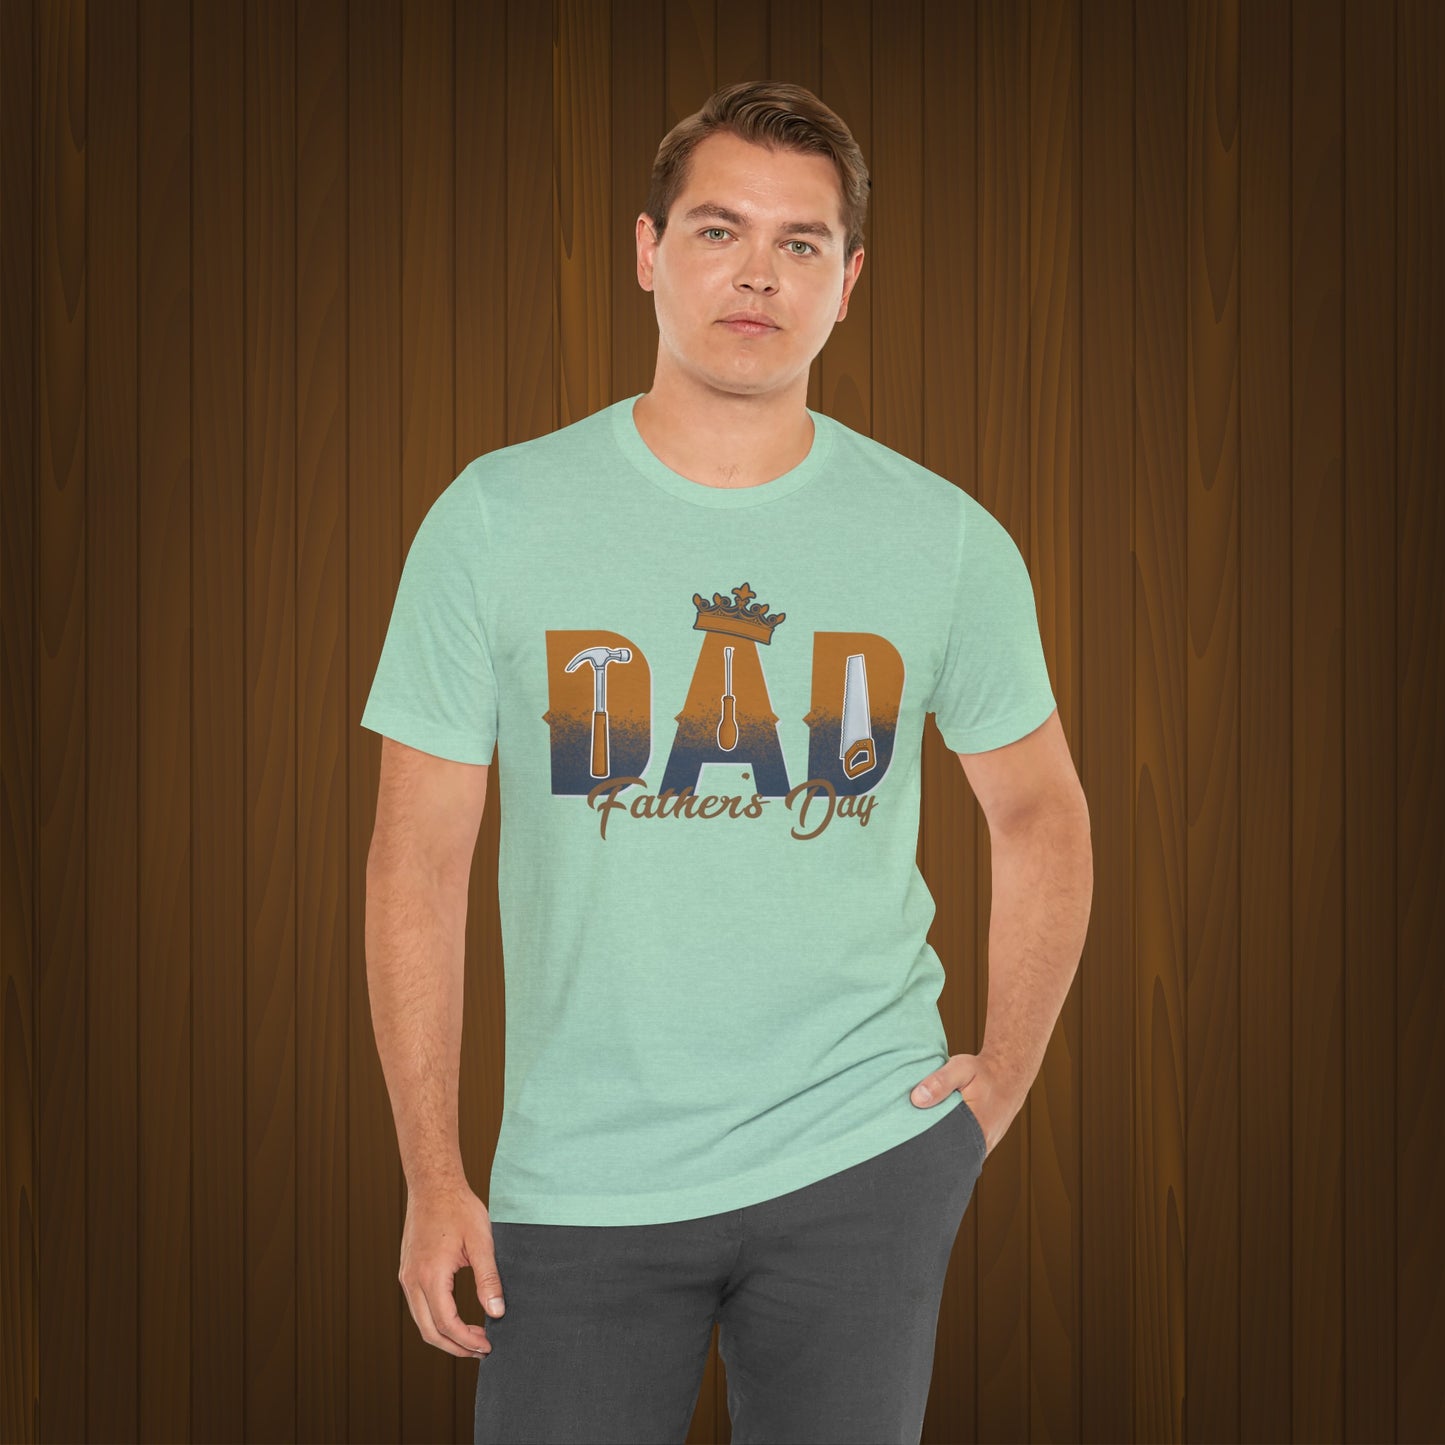 Happy Father's Day T-shirt For Dad, Dad Shirt, Gift for Dad.